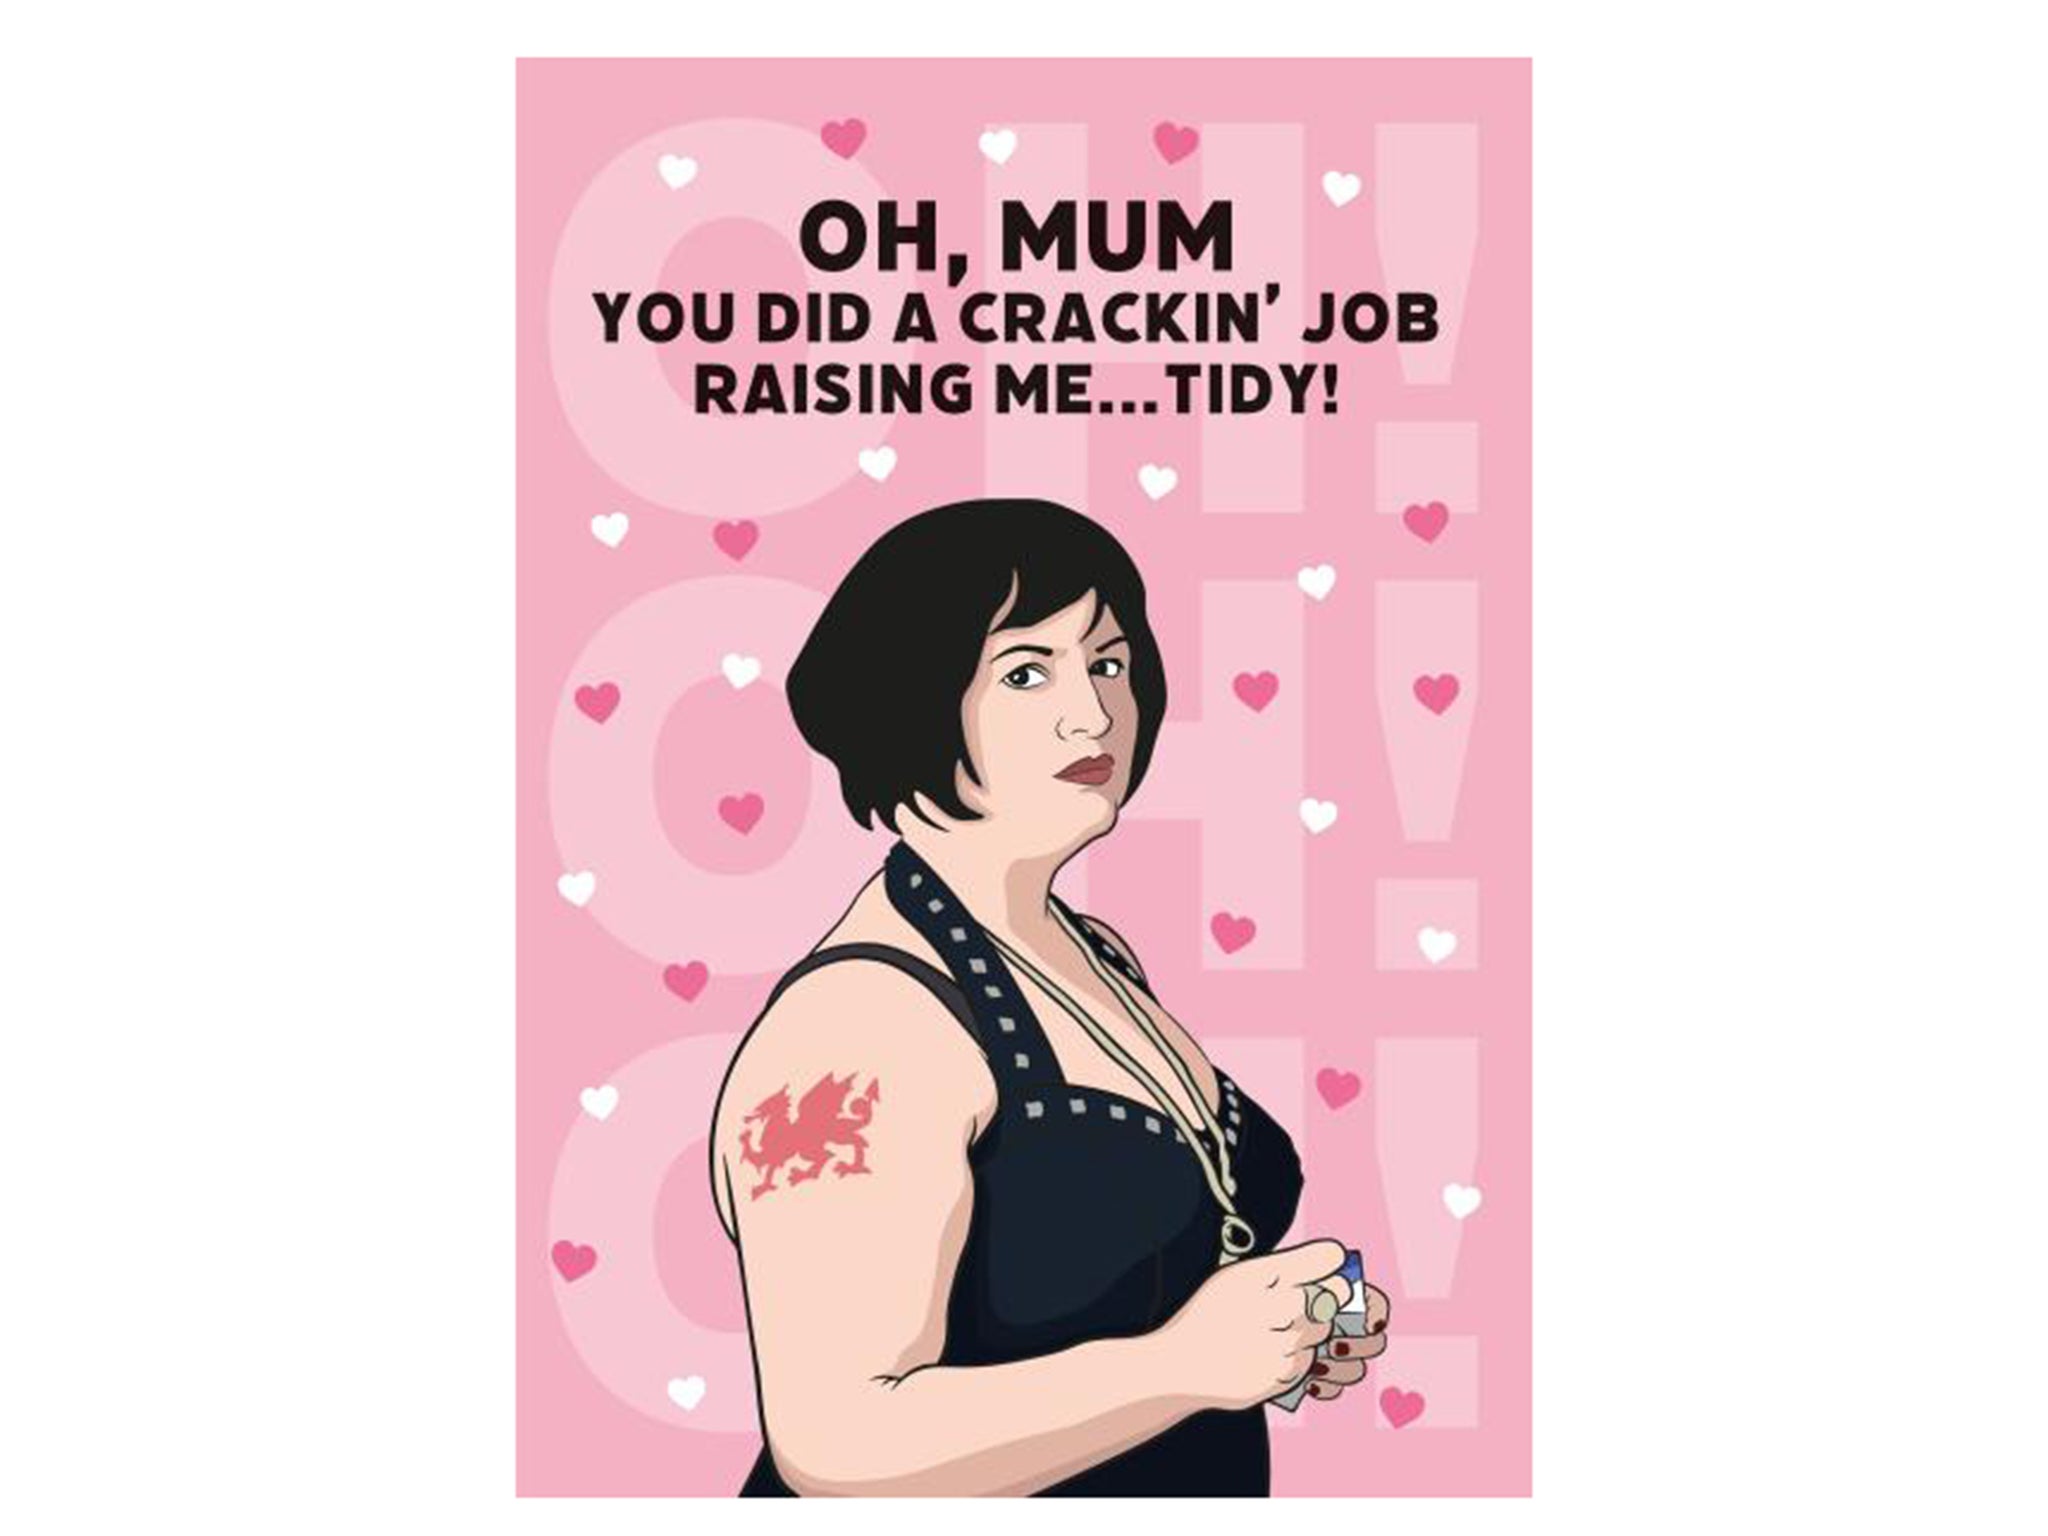 gavin-and-stacey-mothers-day-card-indybest-nessa